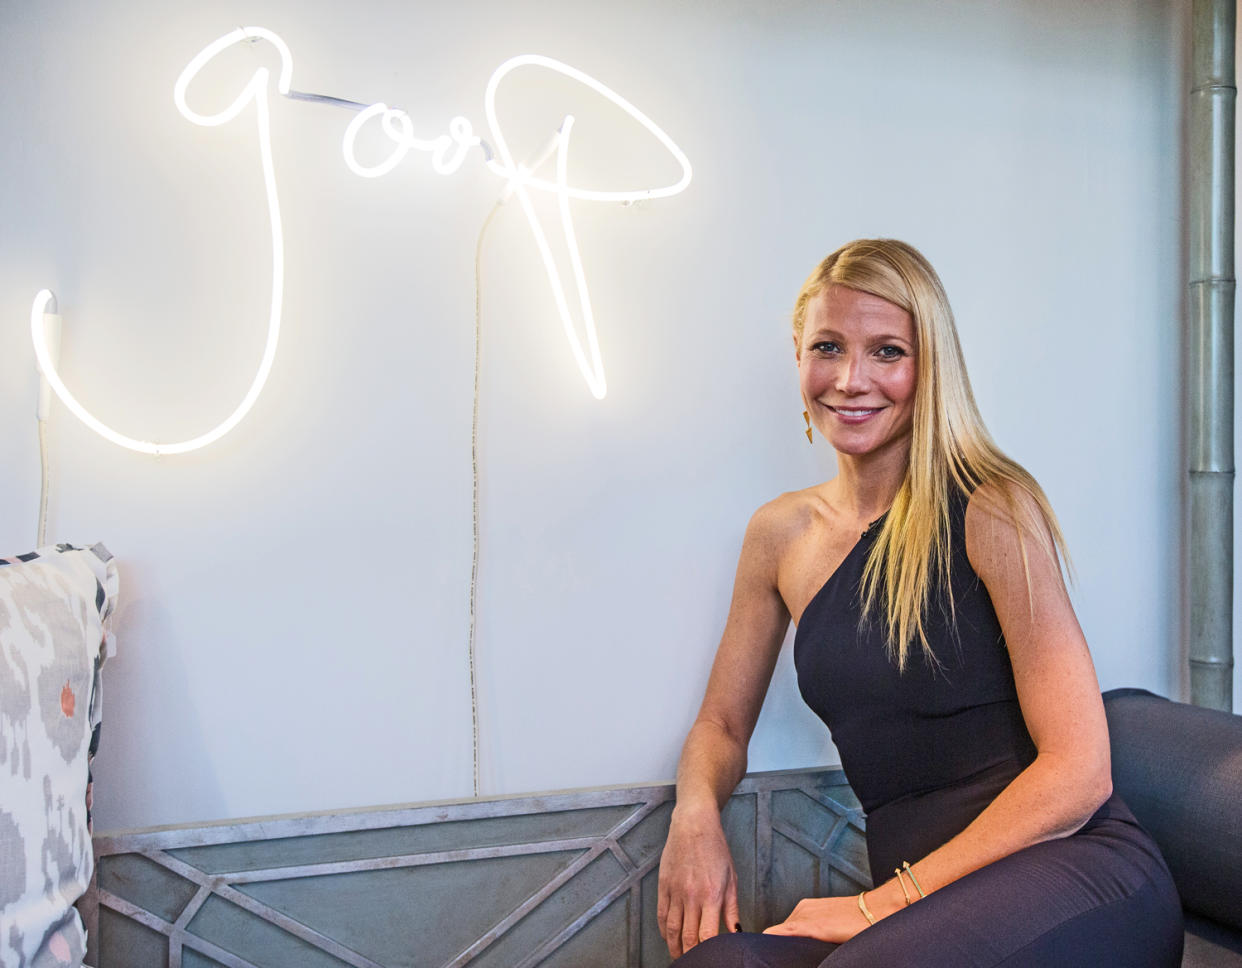 Gwyneth Paltrow at a Goop pop-up shop. (Photo: Getty Images)